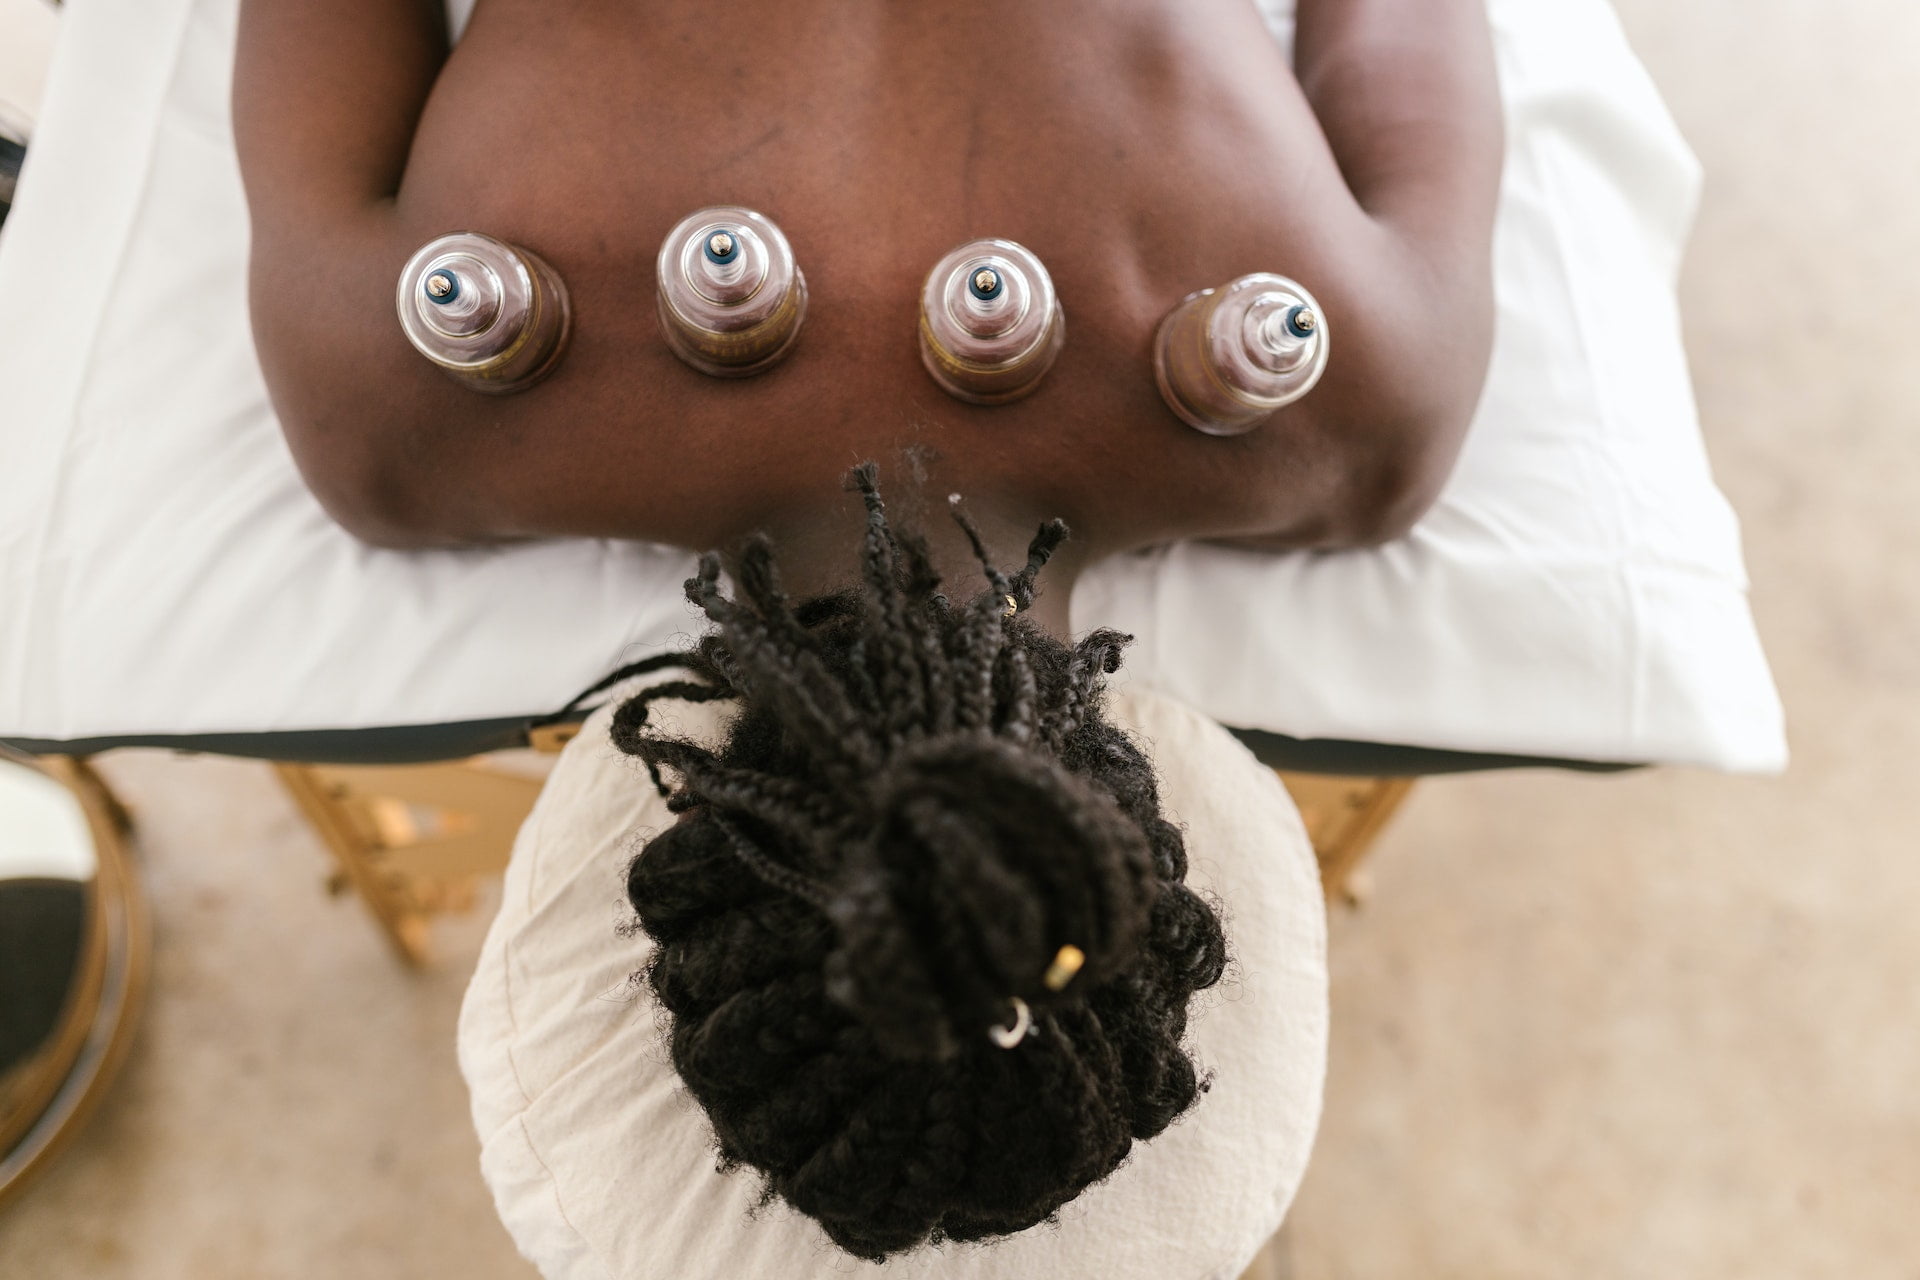 Natural pain management cupping treatment massage